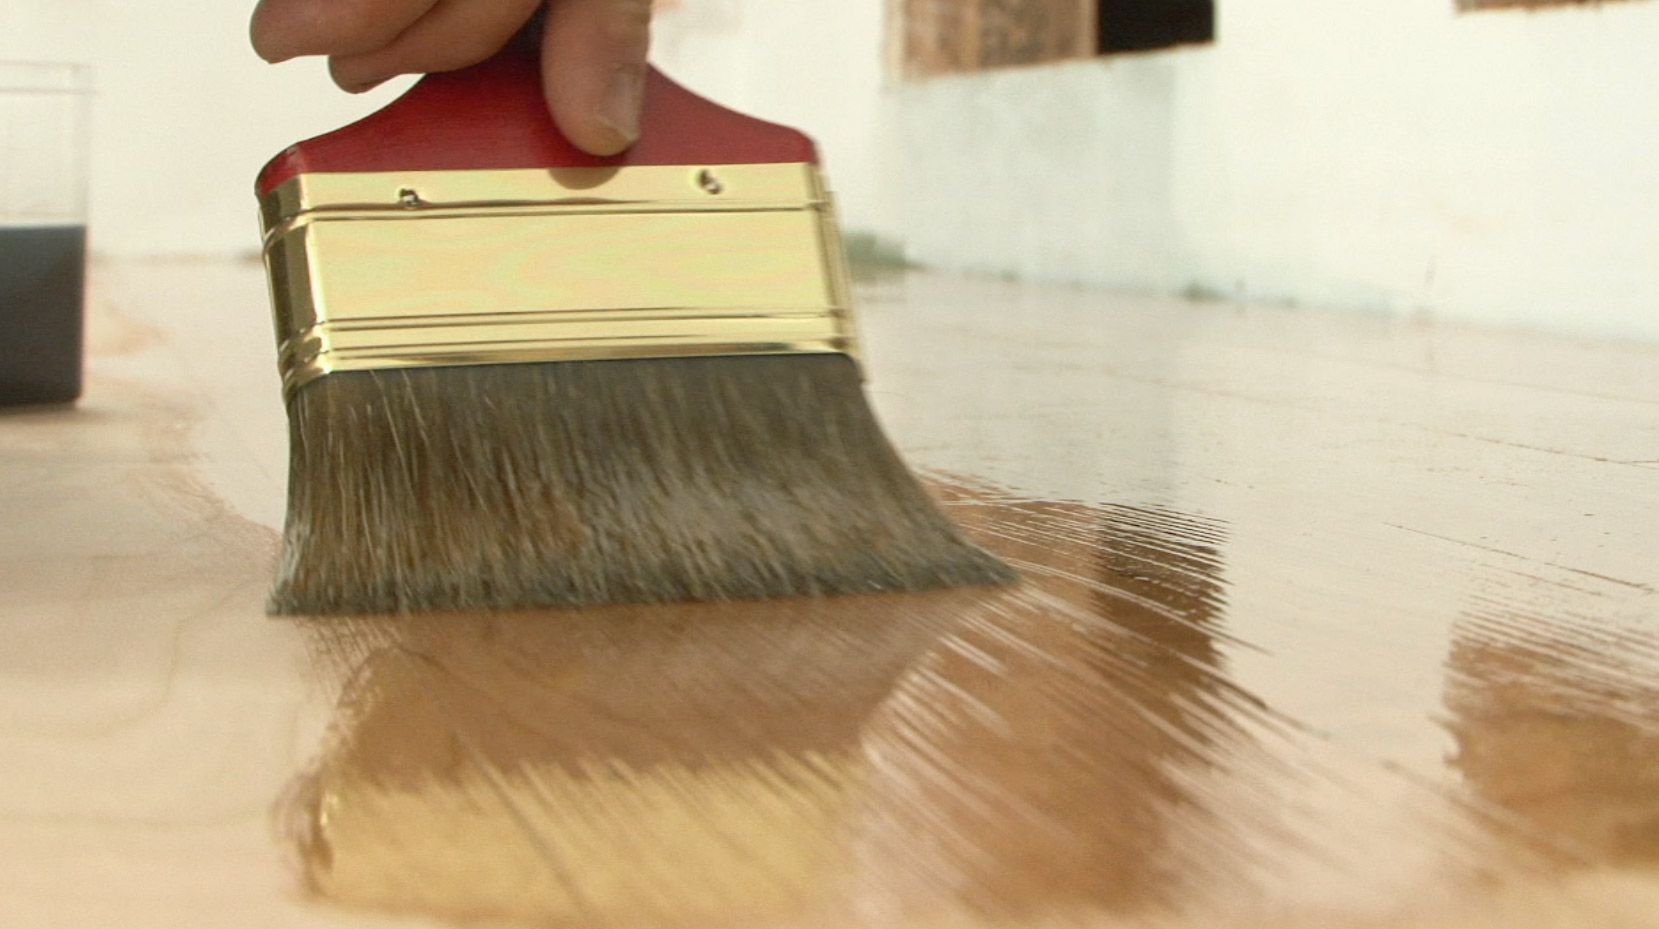 Gap filling & Finishing services provided by trained experts in Floor Sanding Southwark